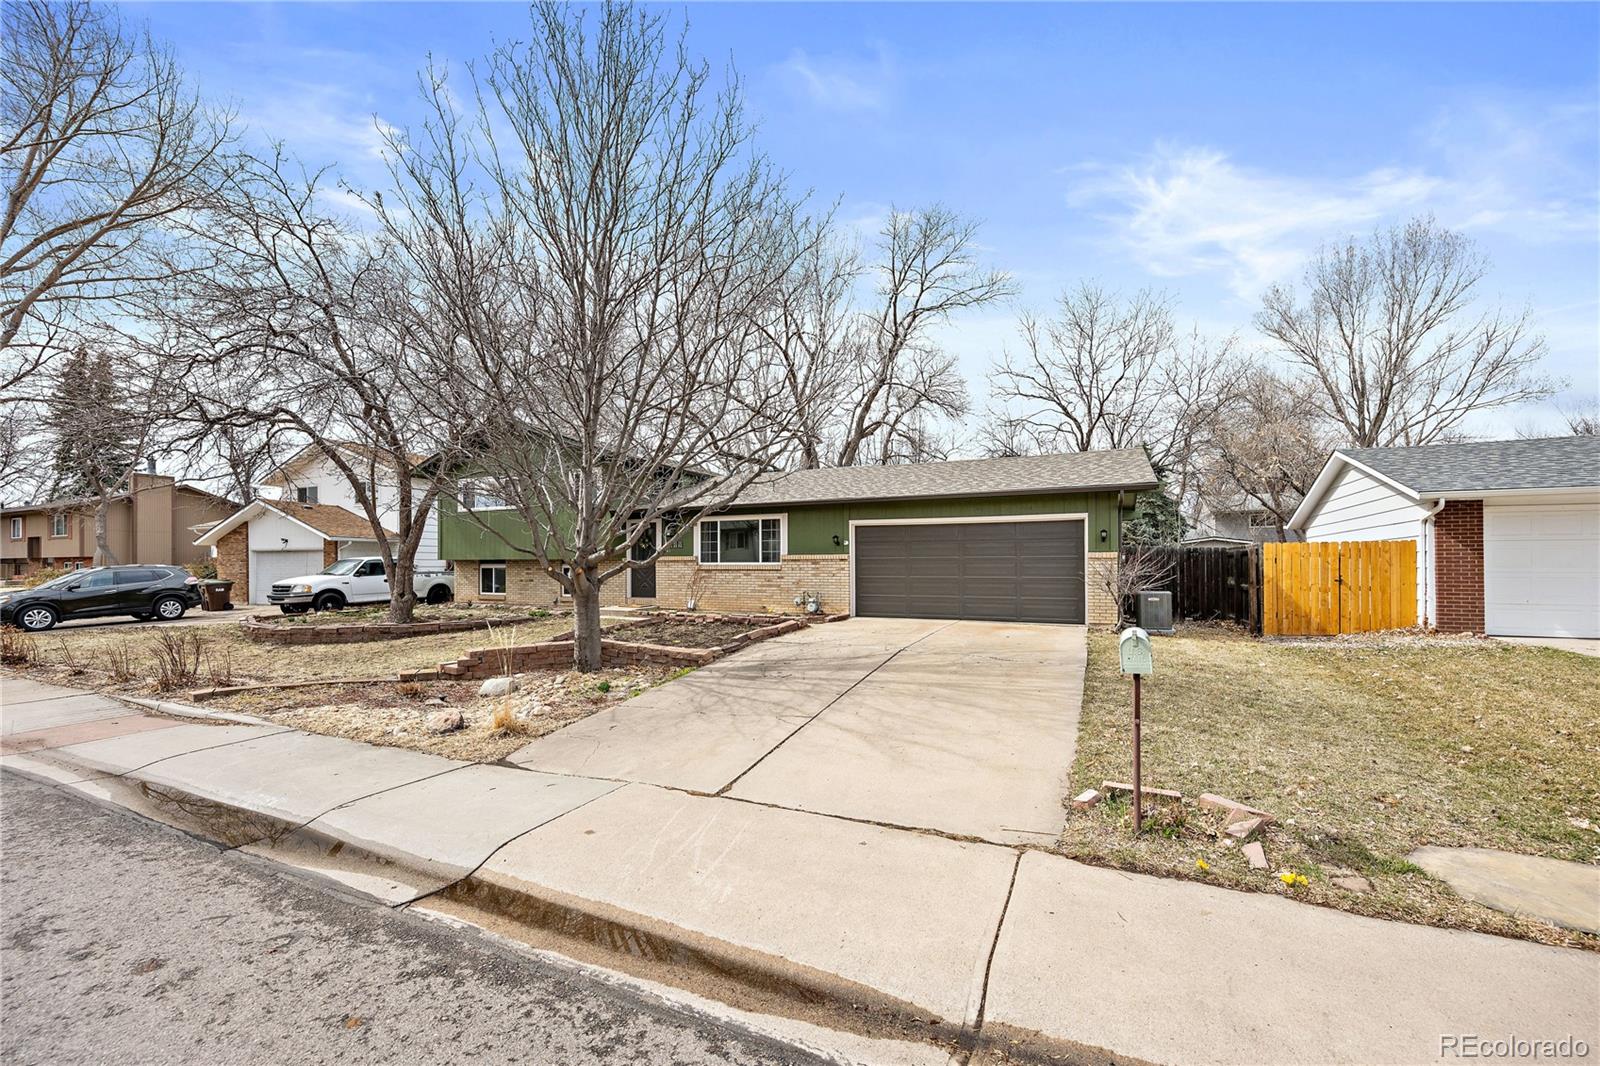 3119  killdeer drive, Fort Collins sold home. Closed on 2024-04-19 for $572,500.